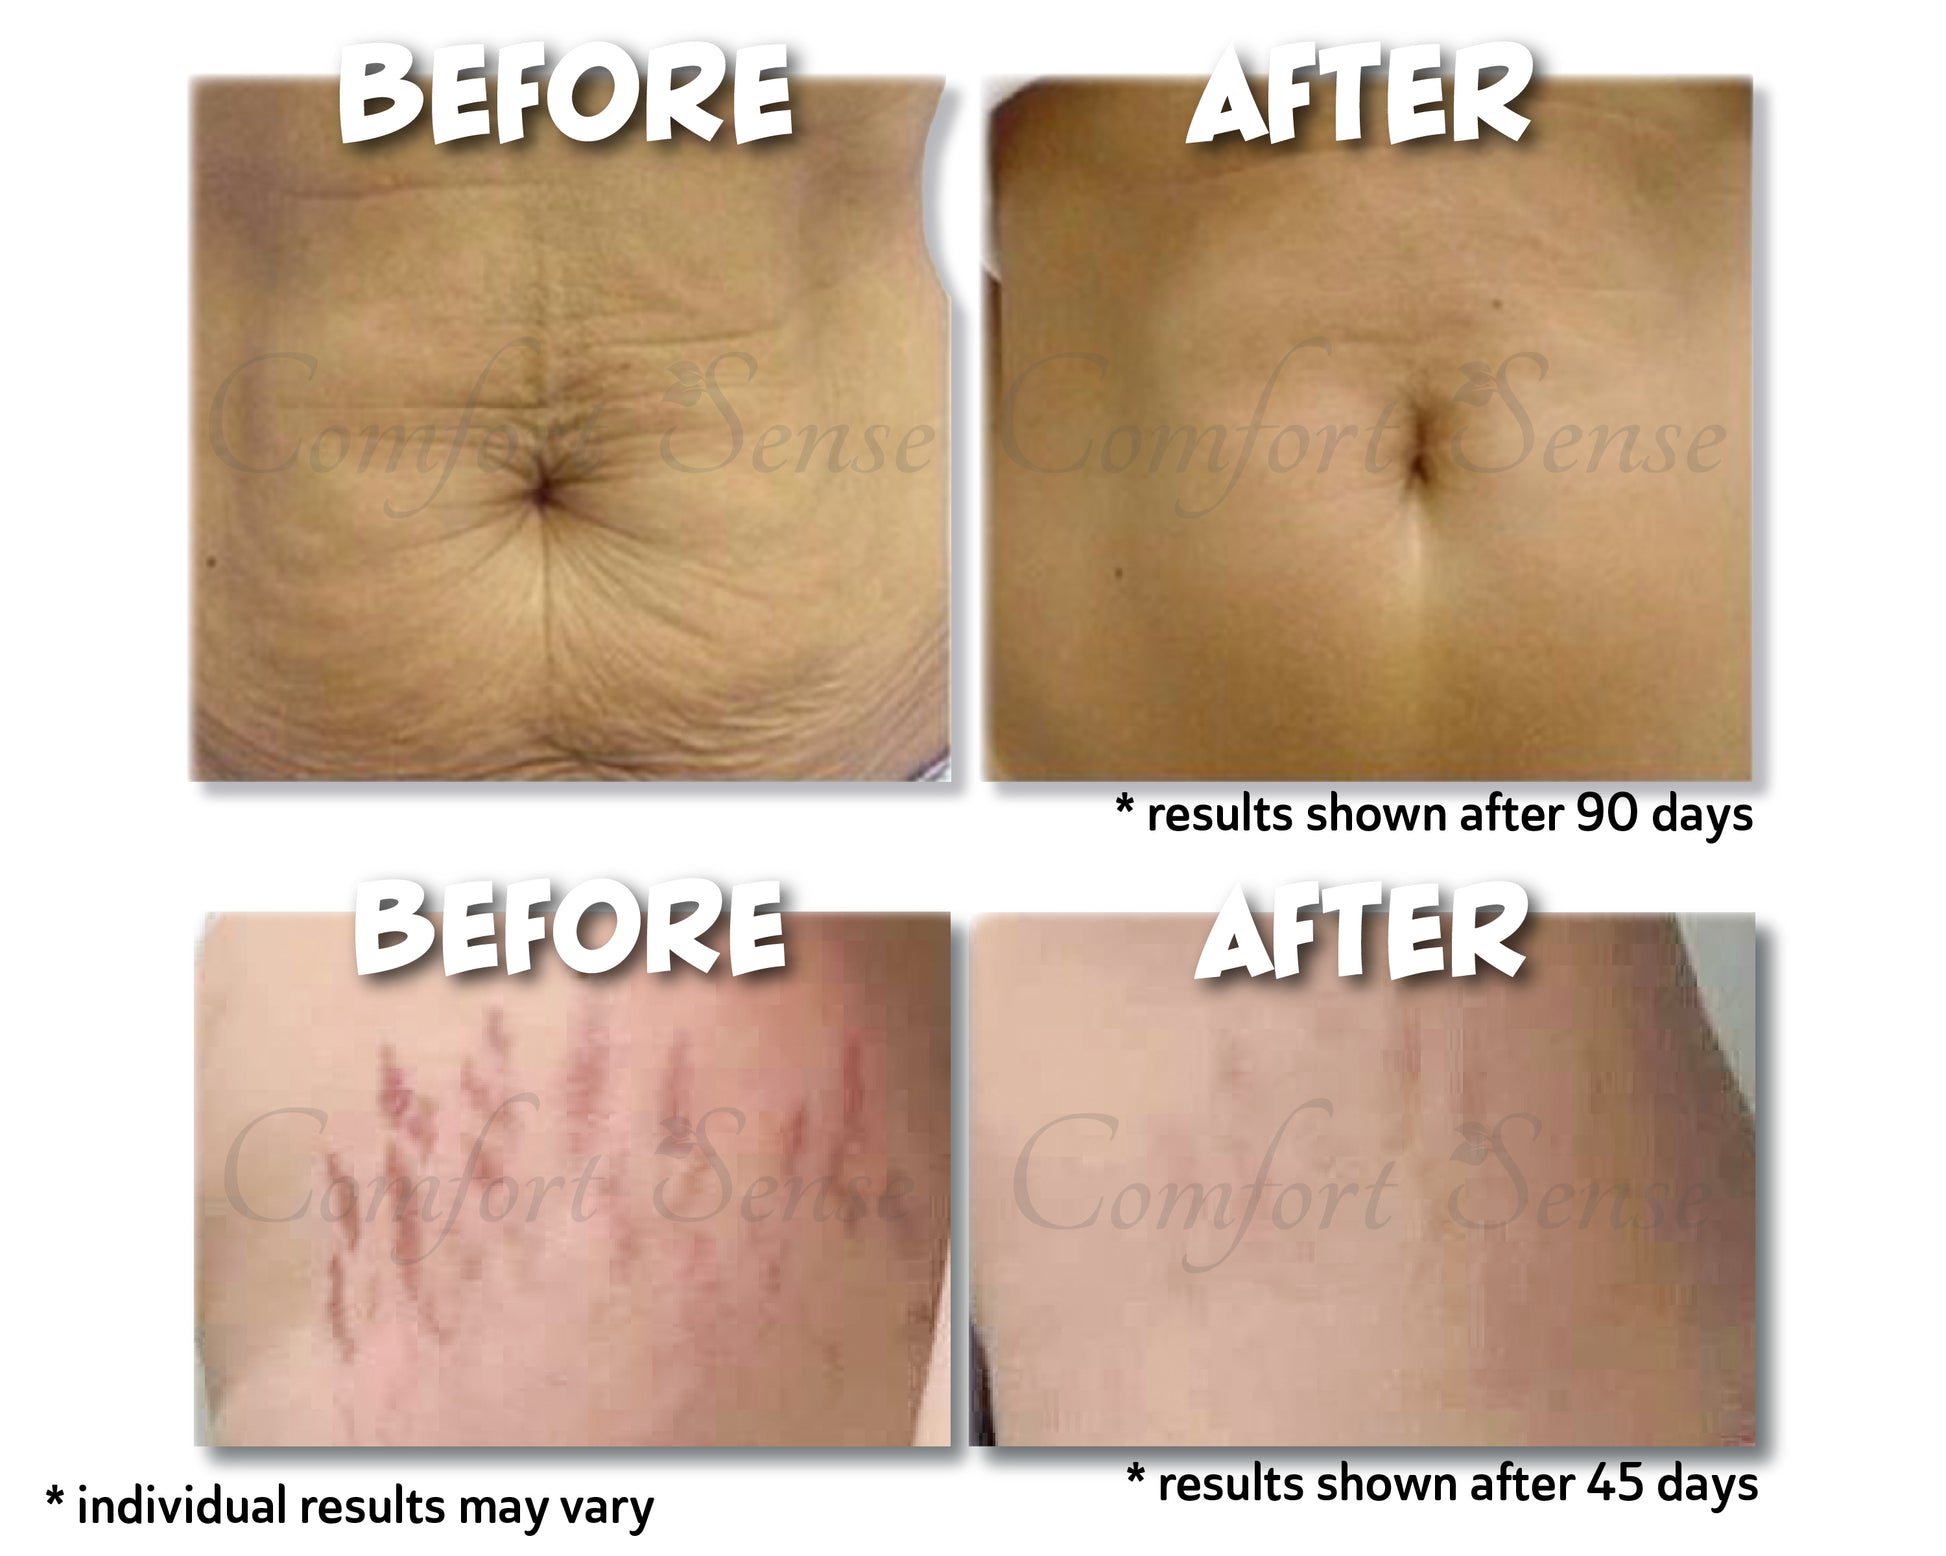 Tighten Skin and Reduce Cellulite, Wrinkles, and Circumferential